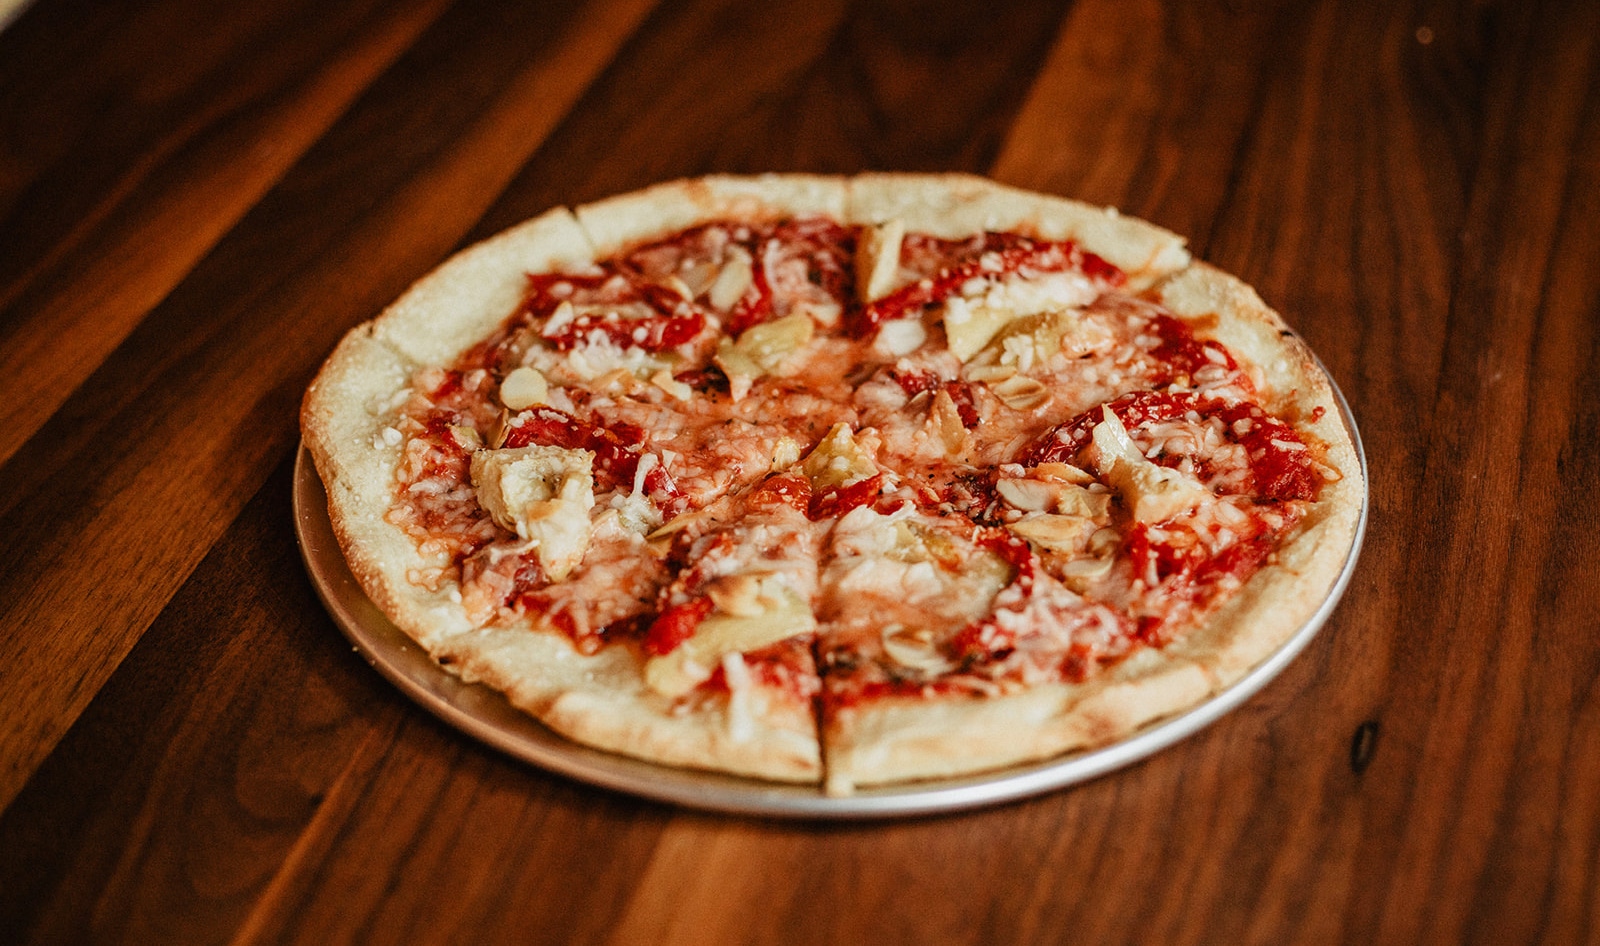 Meat Was Creating Too Much Food Waste. So This Montreal Pizzeria Went Vegan.